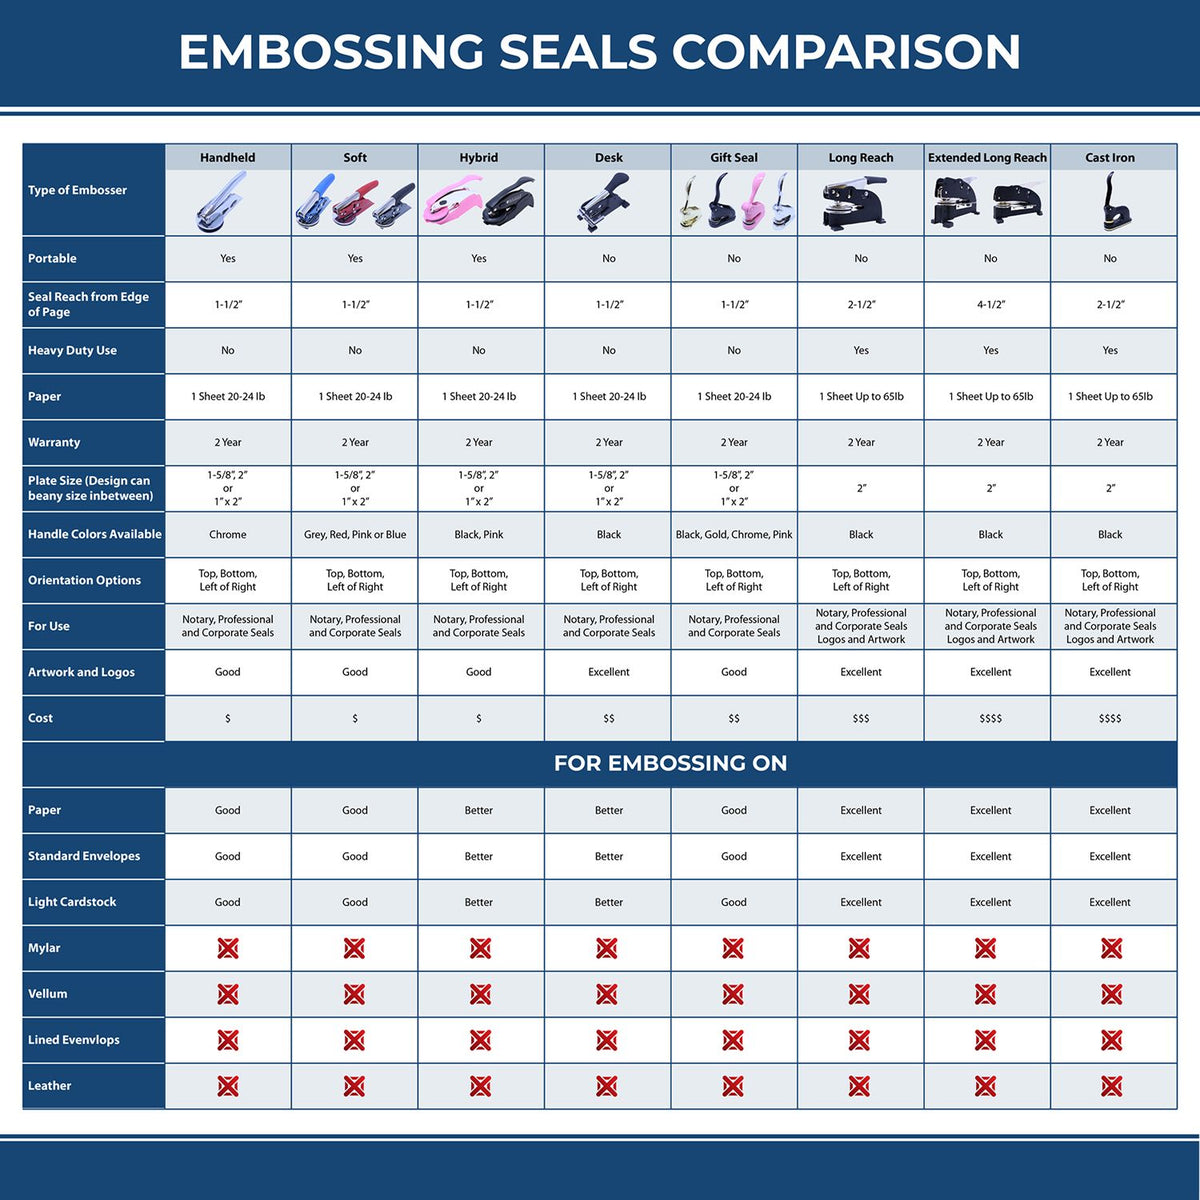 A comparison chart for the different types of mount models available for the Heavy Duty Cast Iron Illinois Architect Embosser.